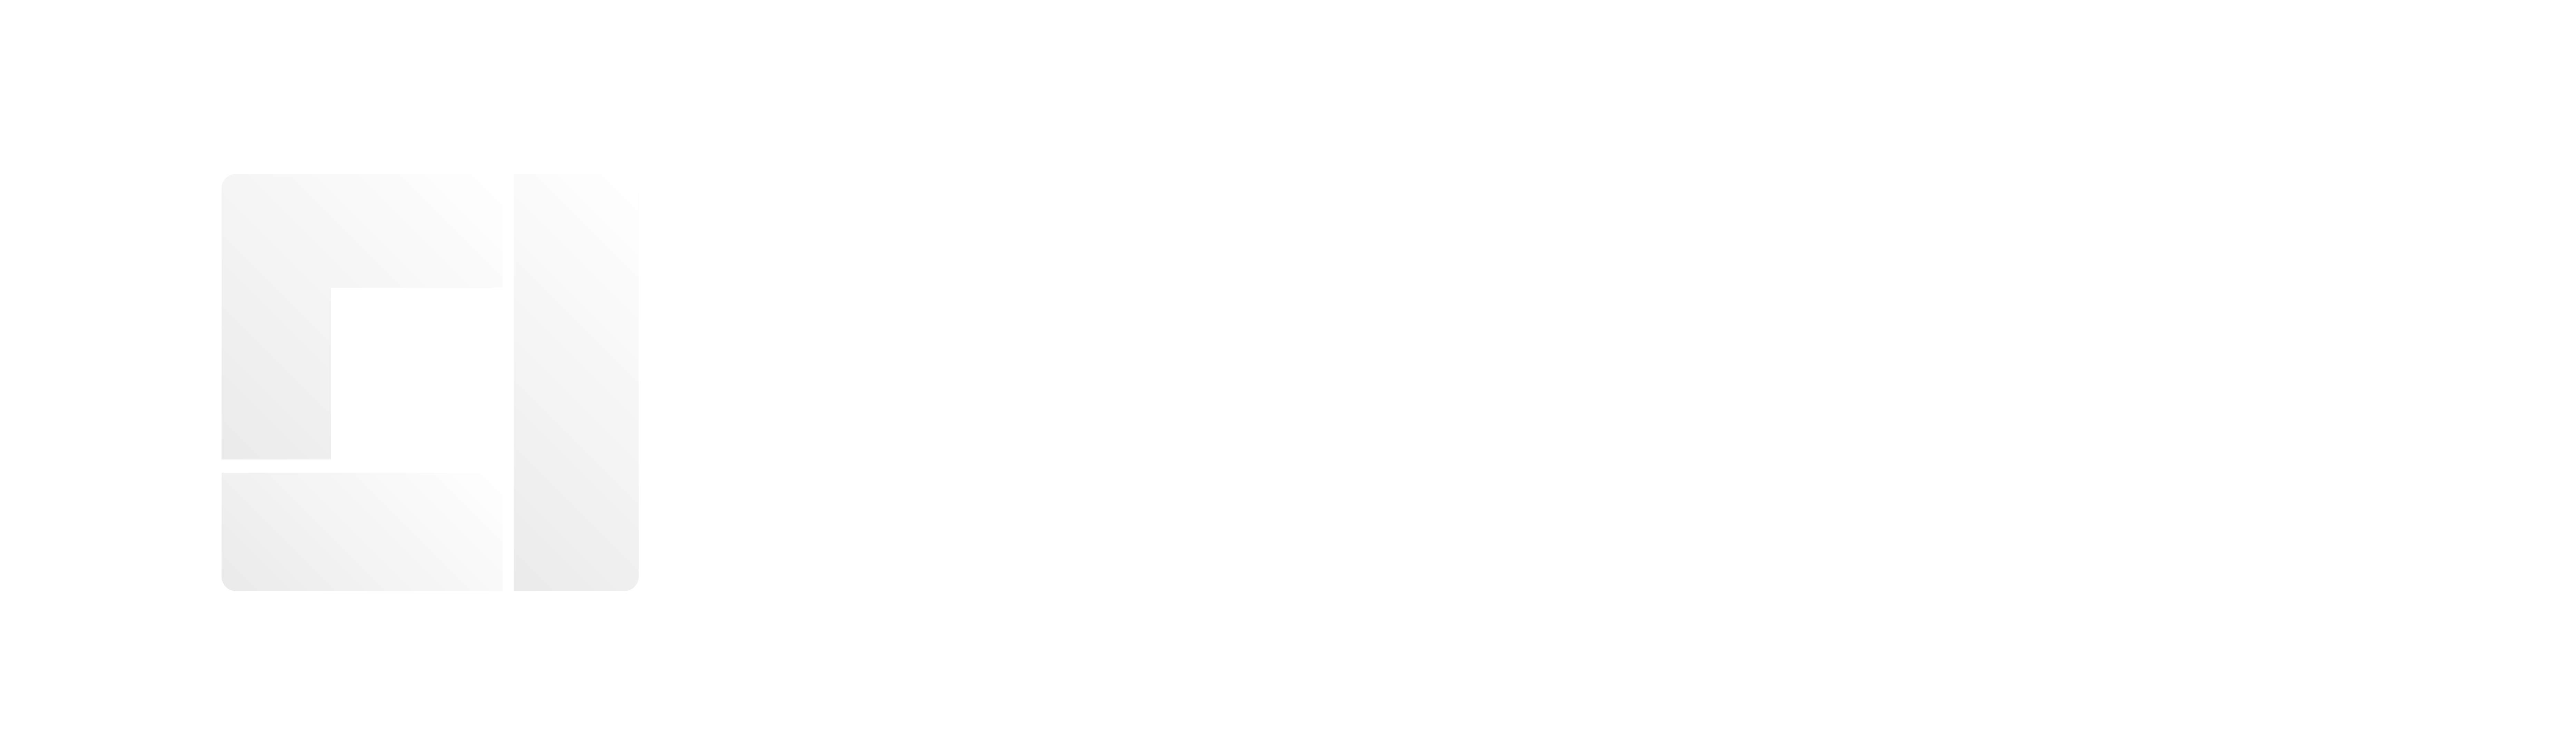 Betabox Learning